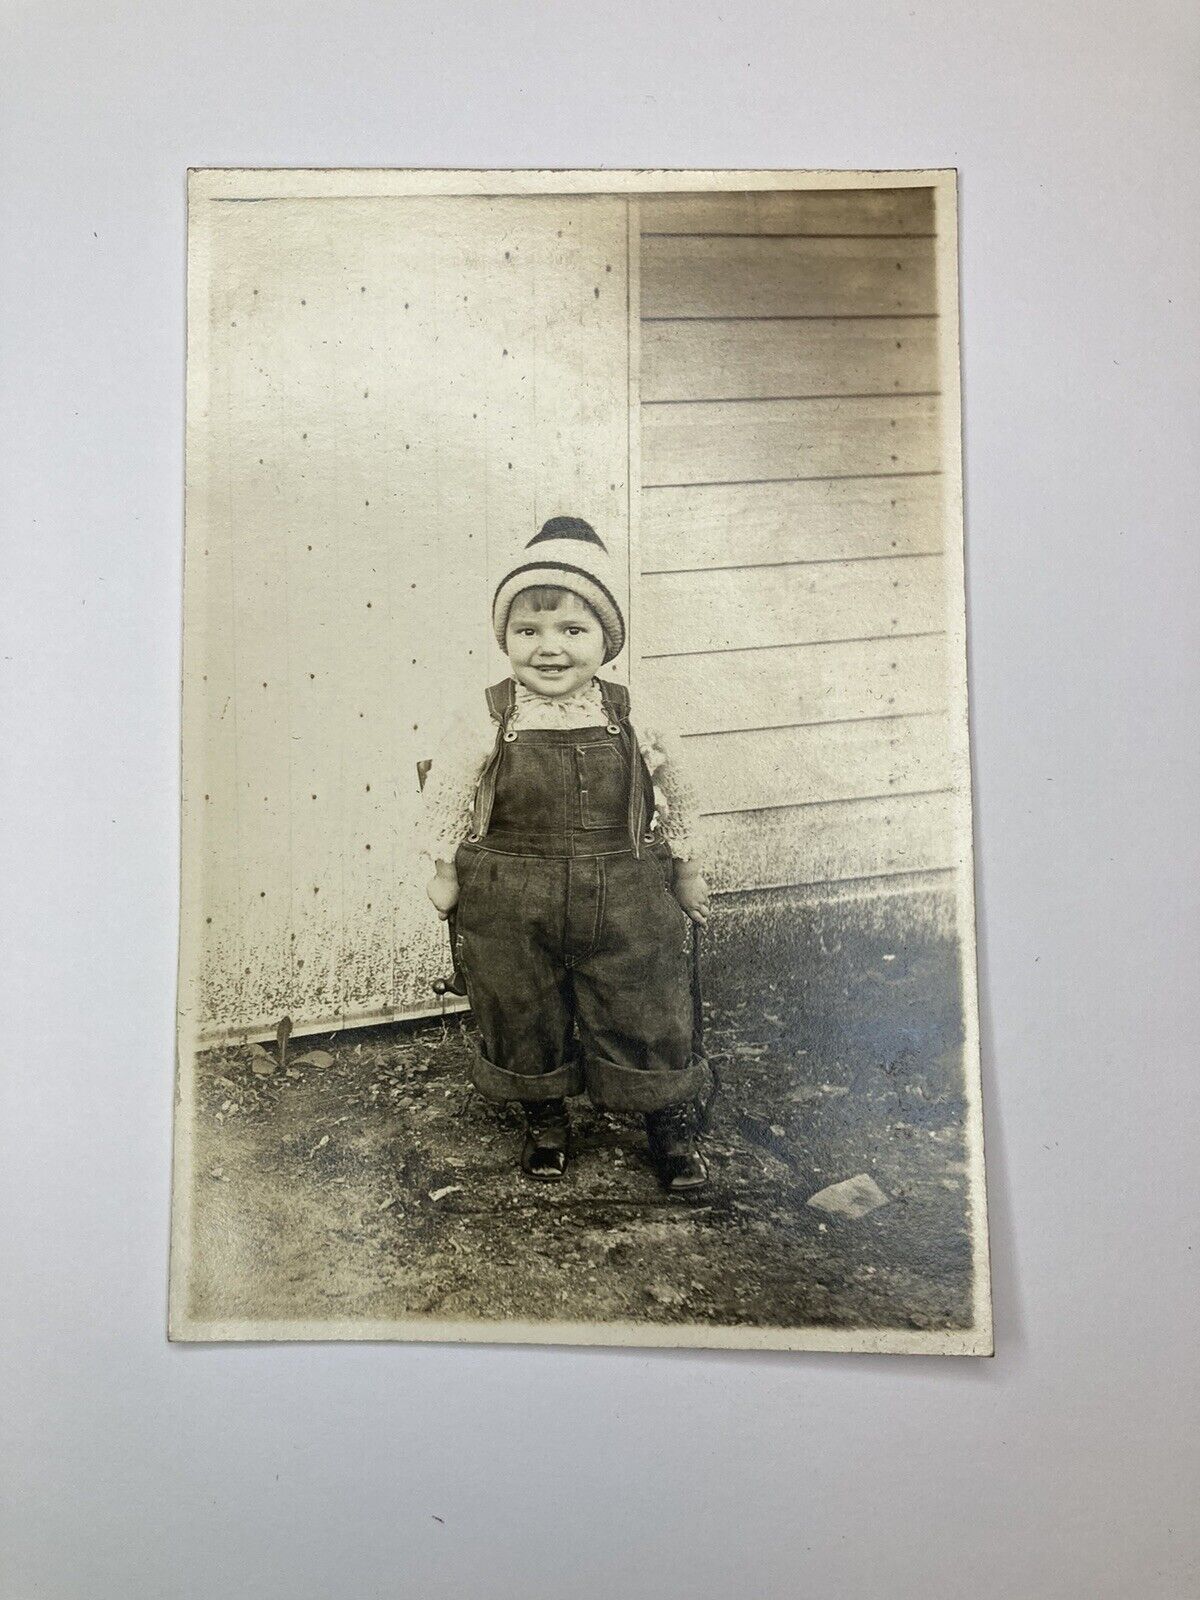 c1910’s Adorable Child Wearing Overalls Posing With Tools ANTIQUE Photo